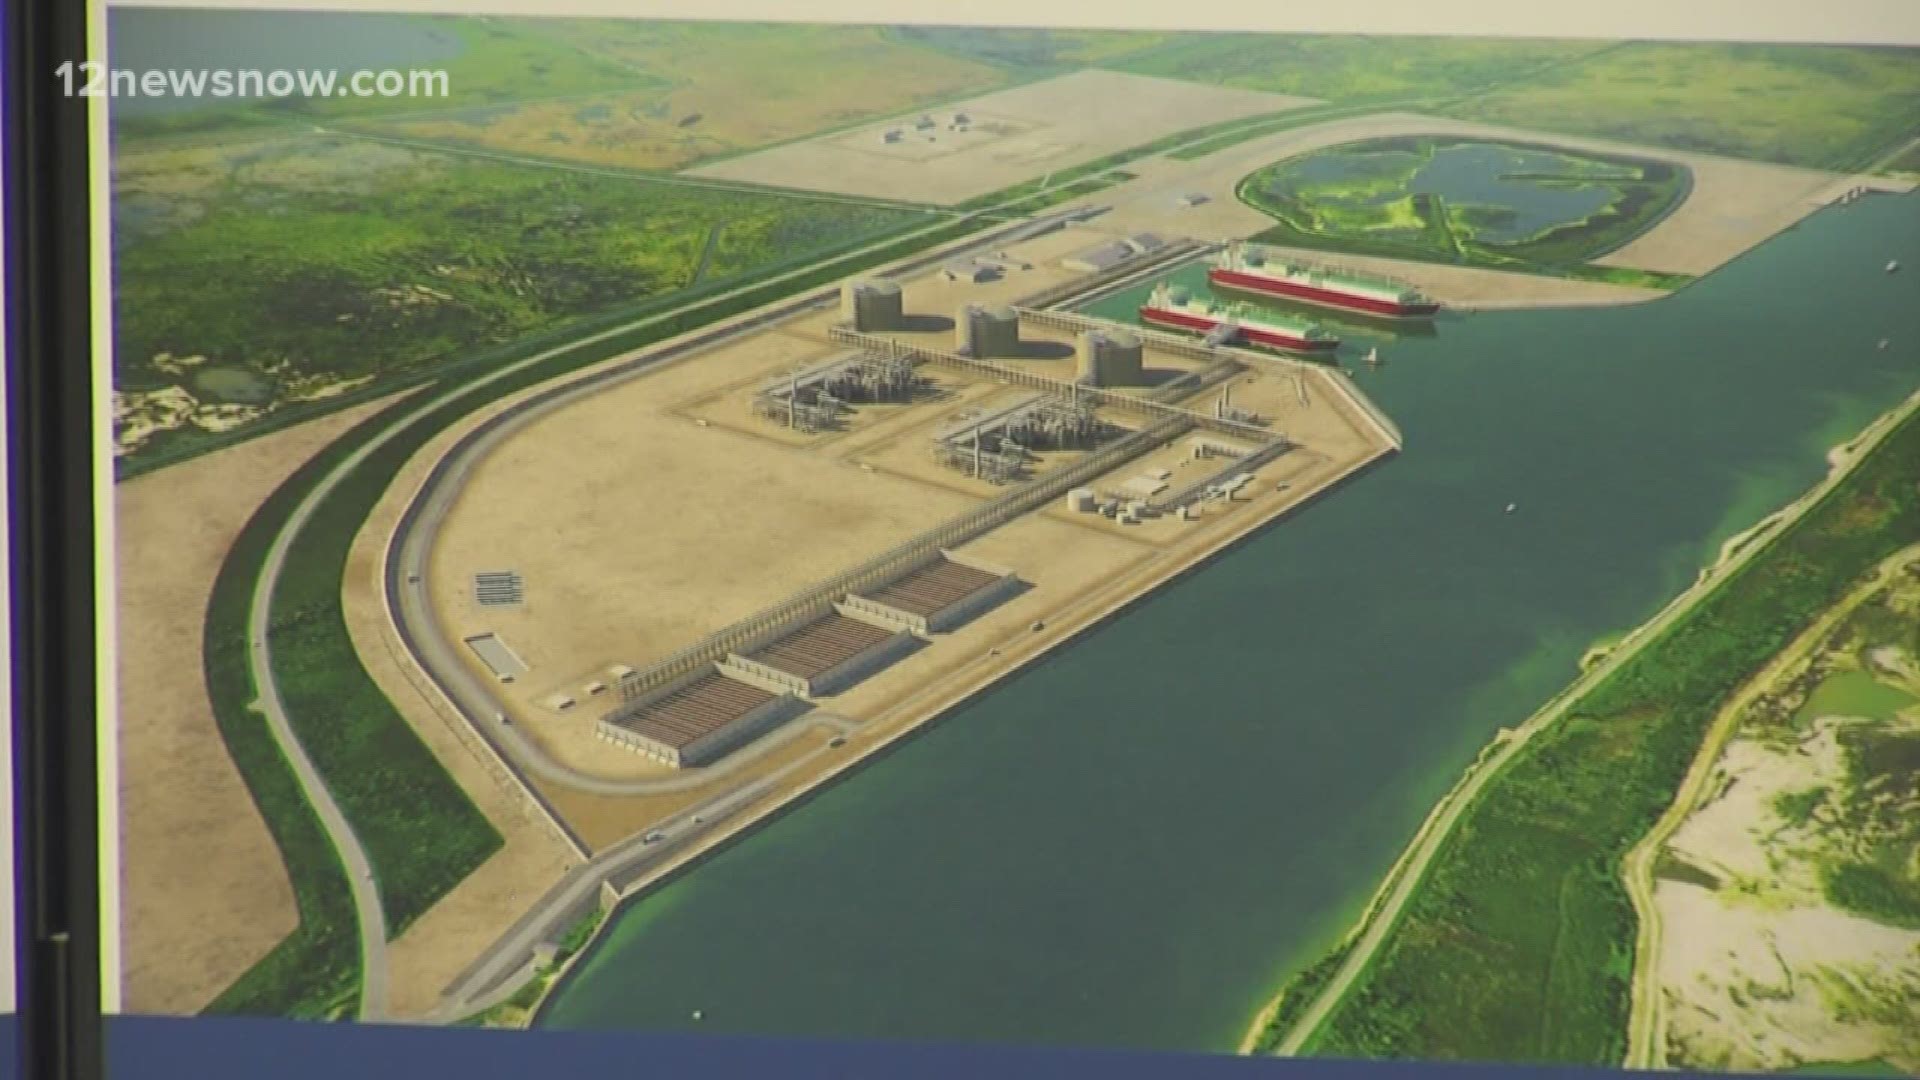 Golden Pass LNG wanted to get the community's view on upcoming expansion.